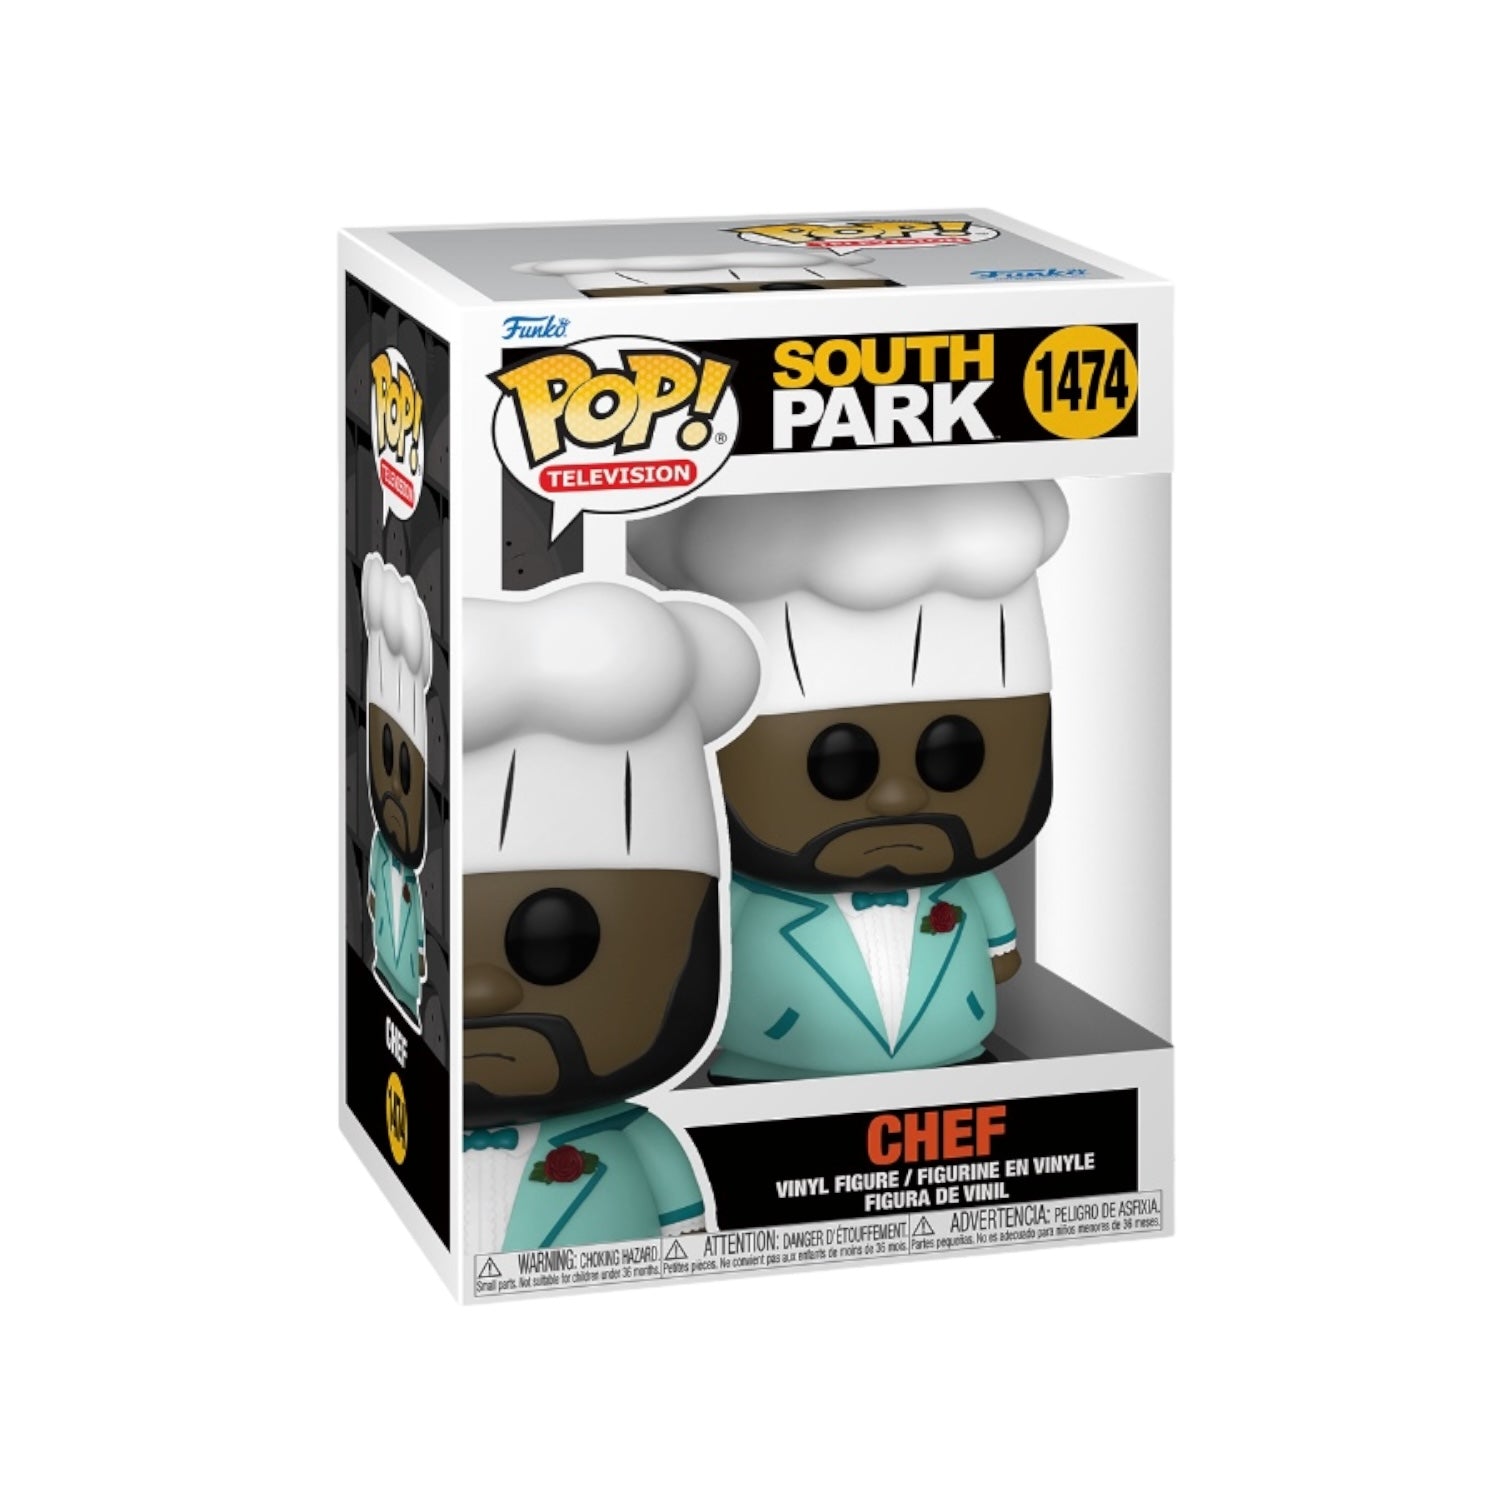 Chef in suit #1474 Funko Pop! - South Park